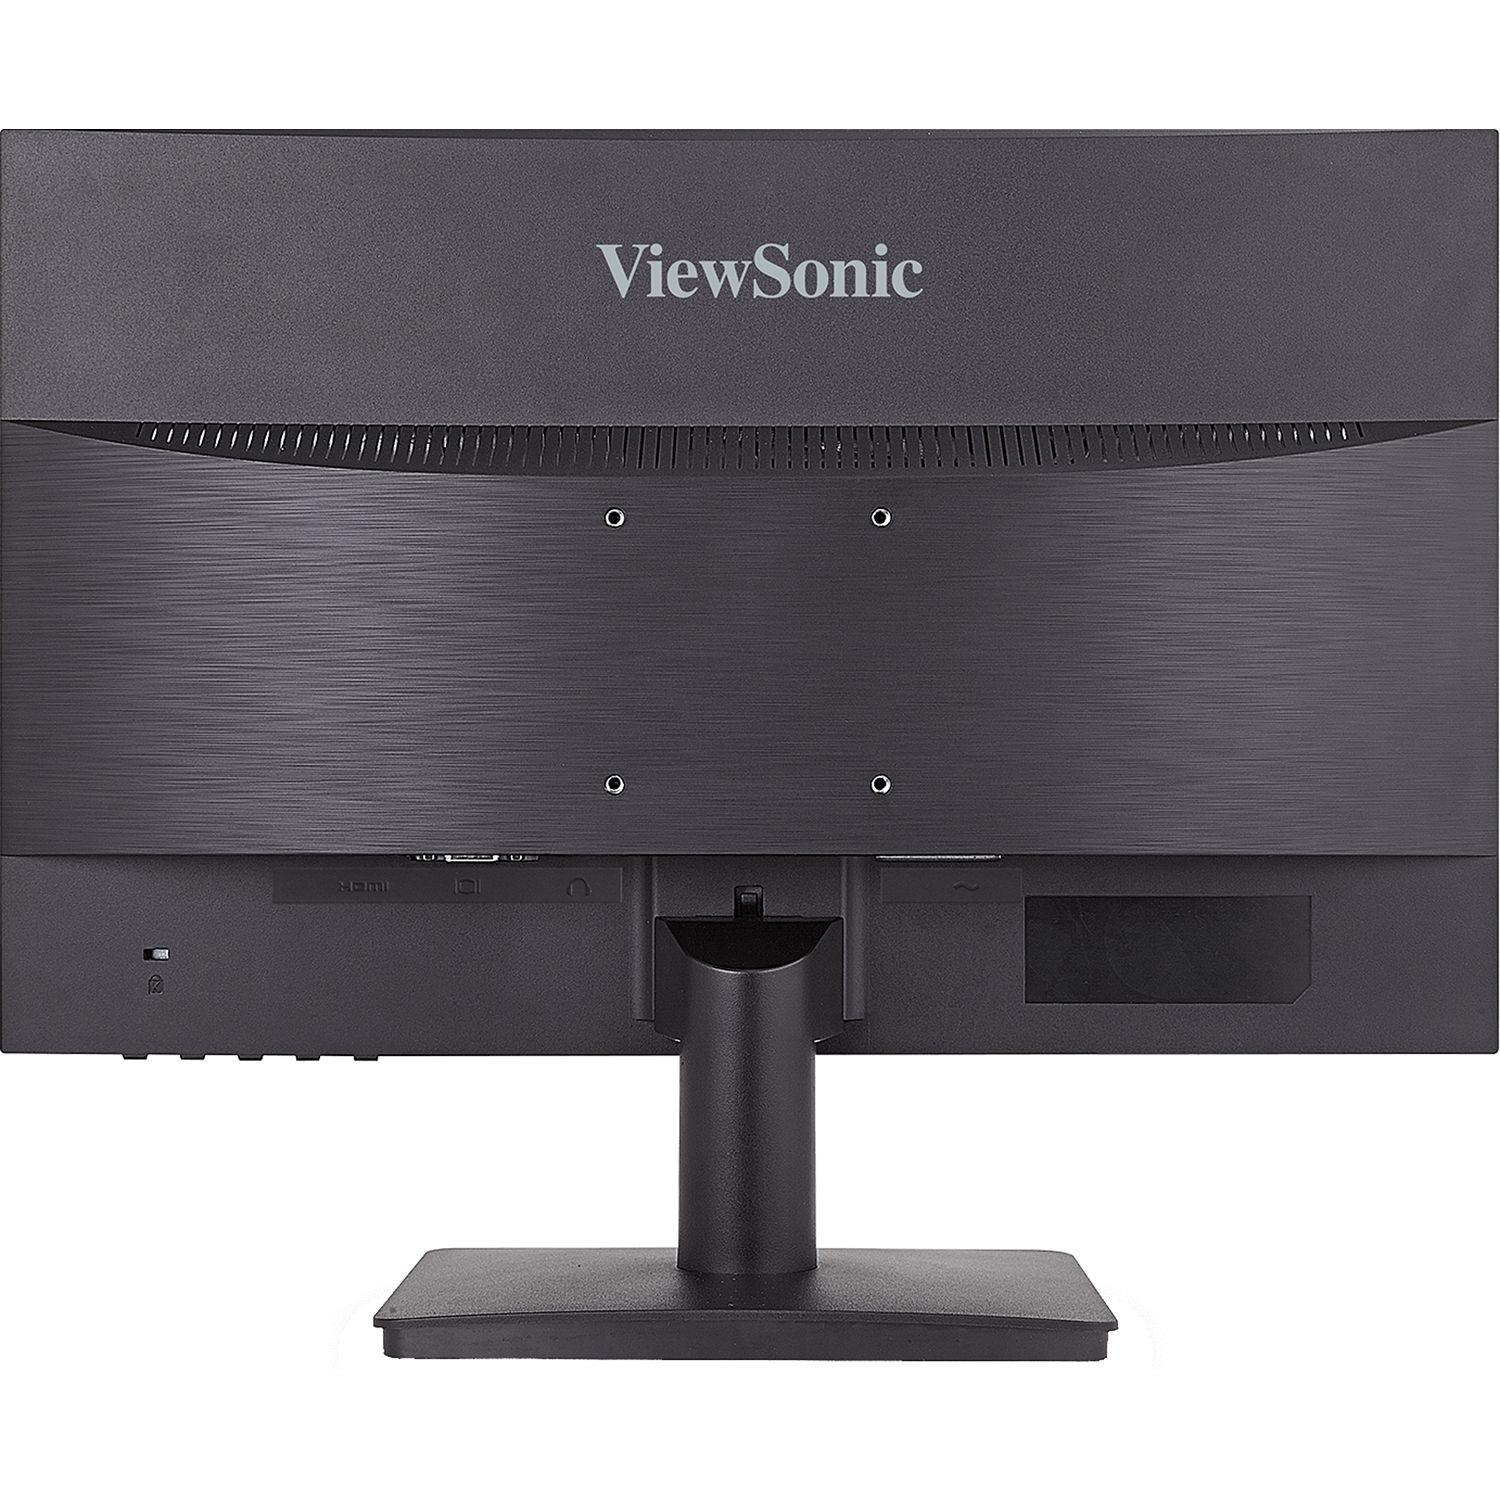 ViewSonic VA1903A-S 19" 1366x768 Home and Office Monitor - Certified Refurbished